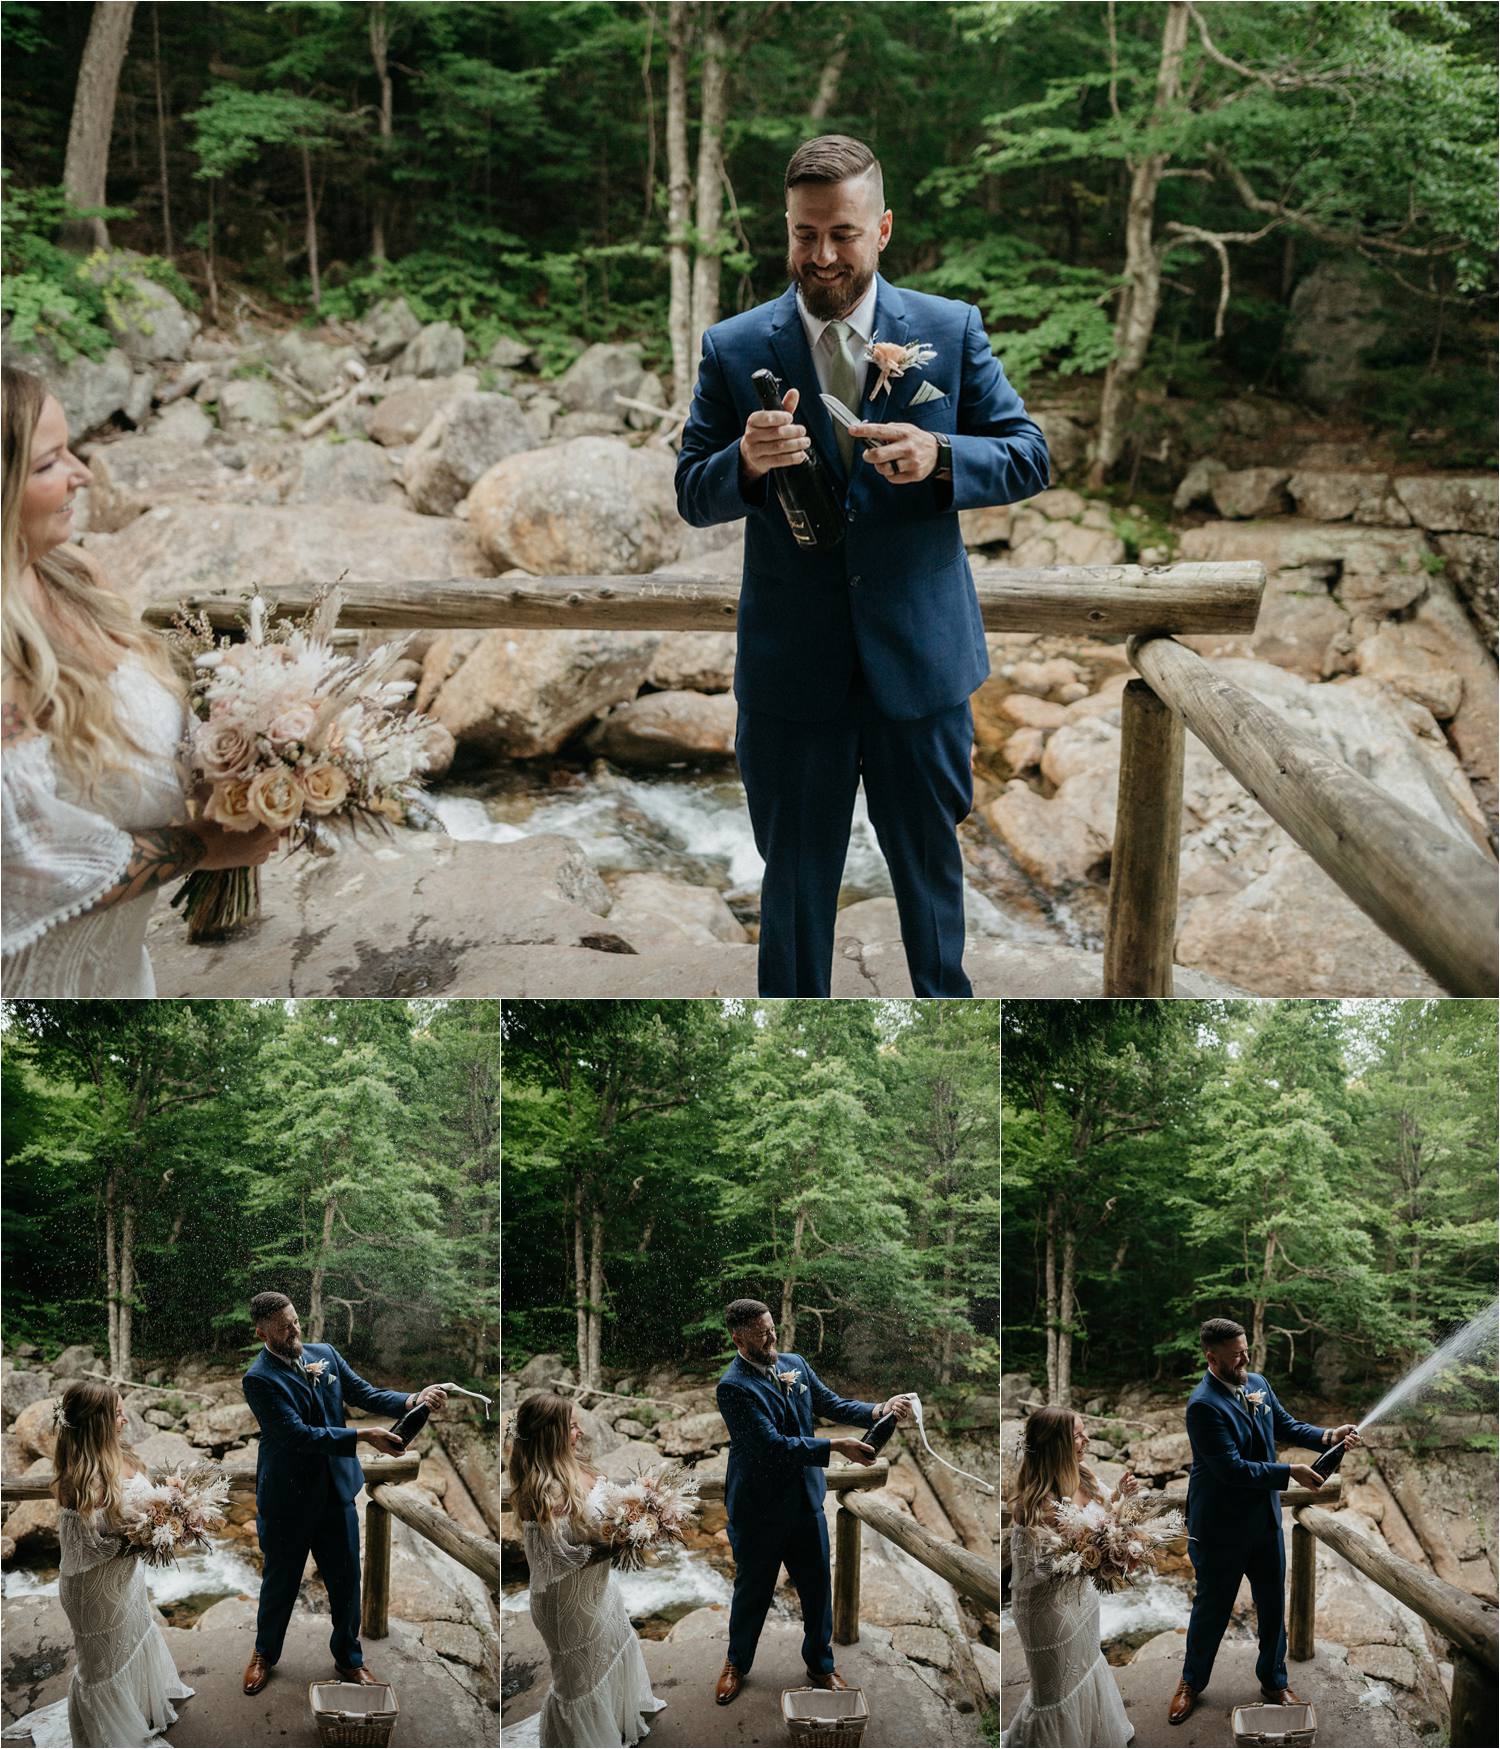 Bride and groom sharing champagne after eloping in the white mountains.